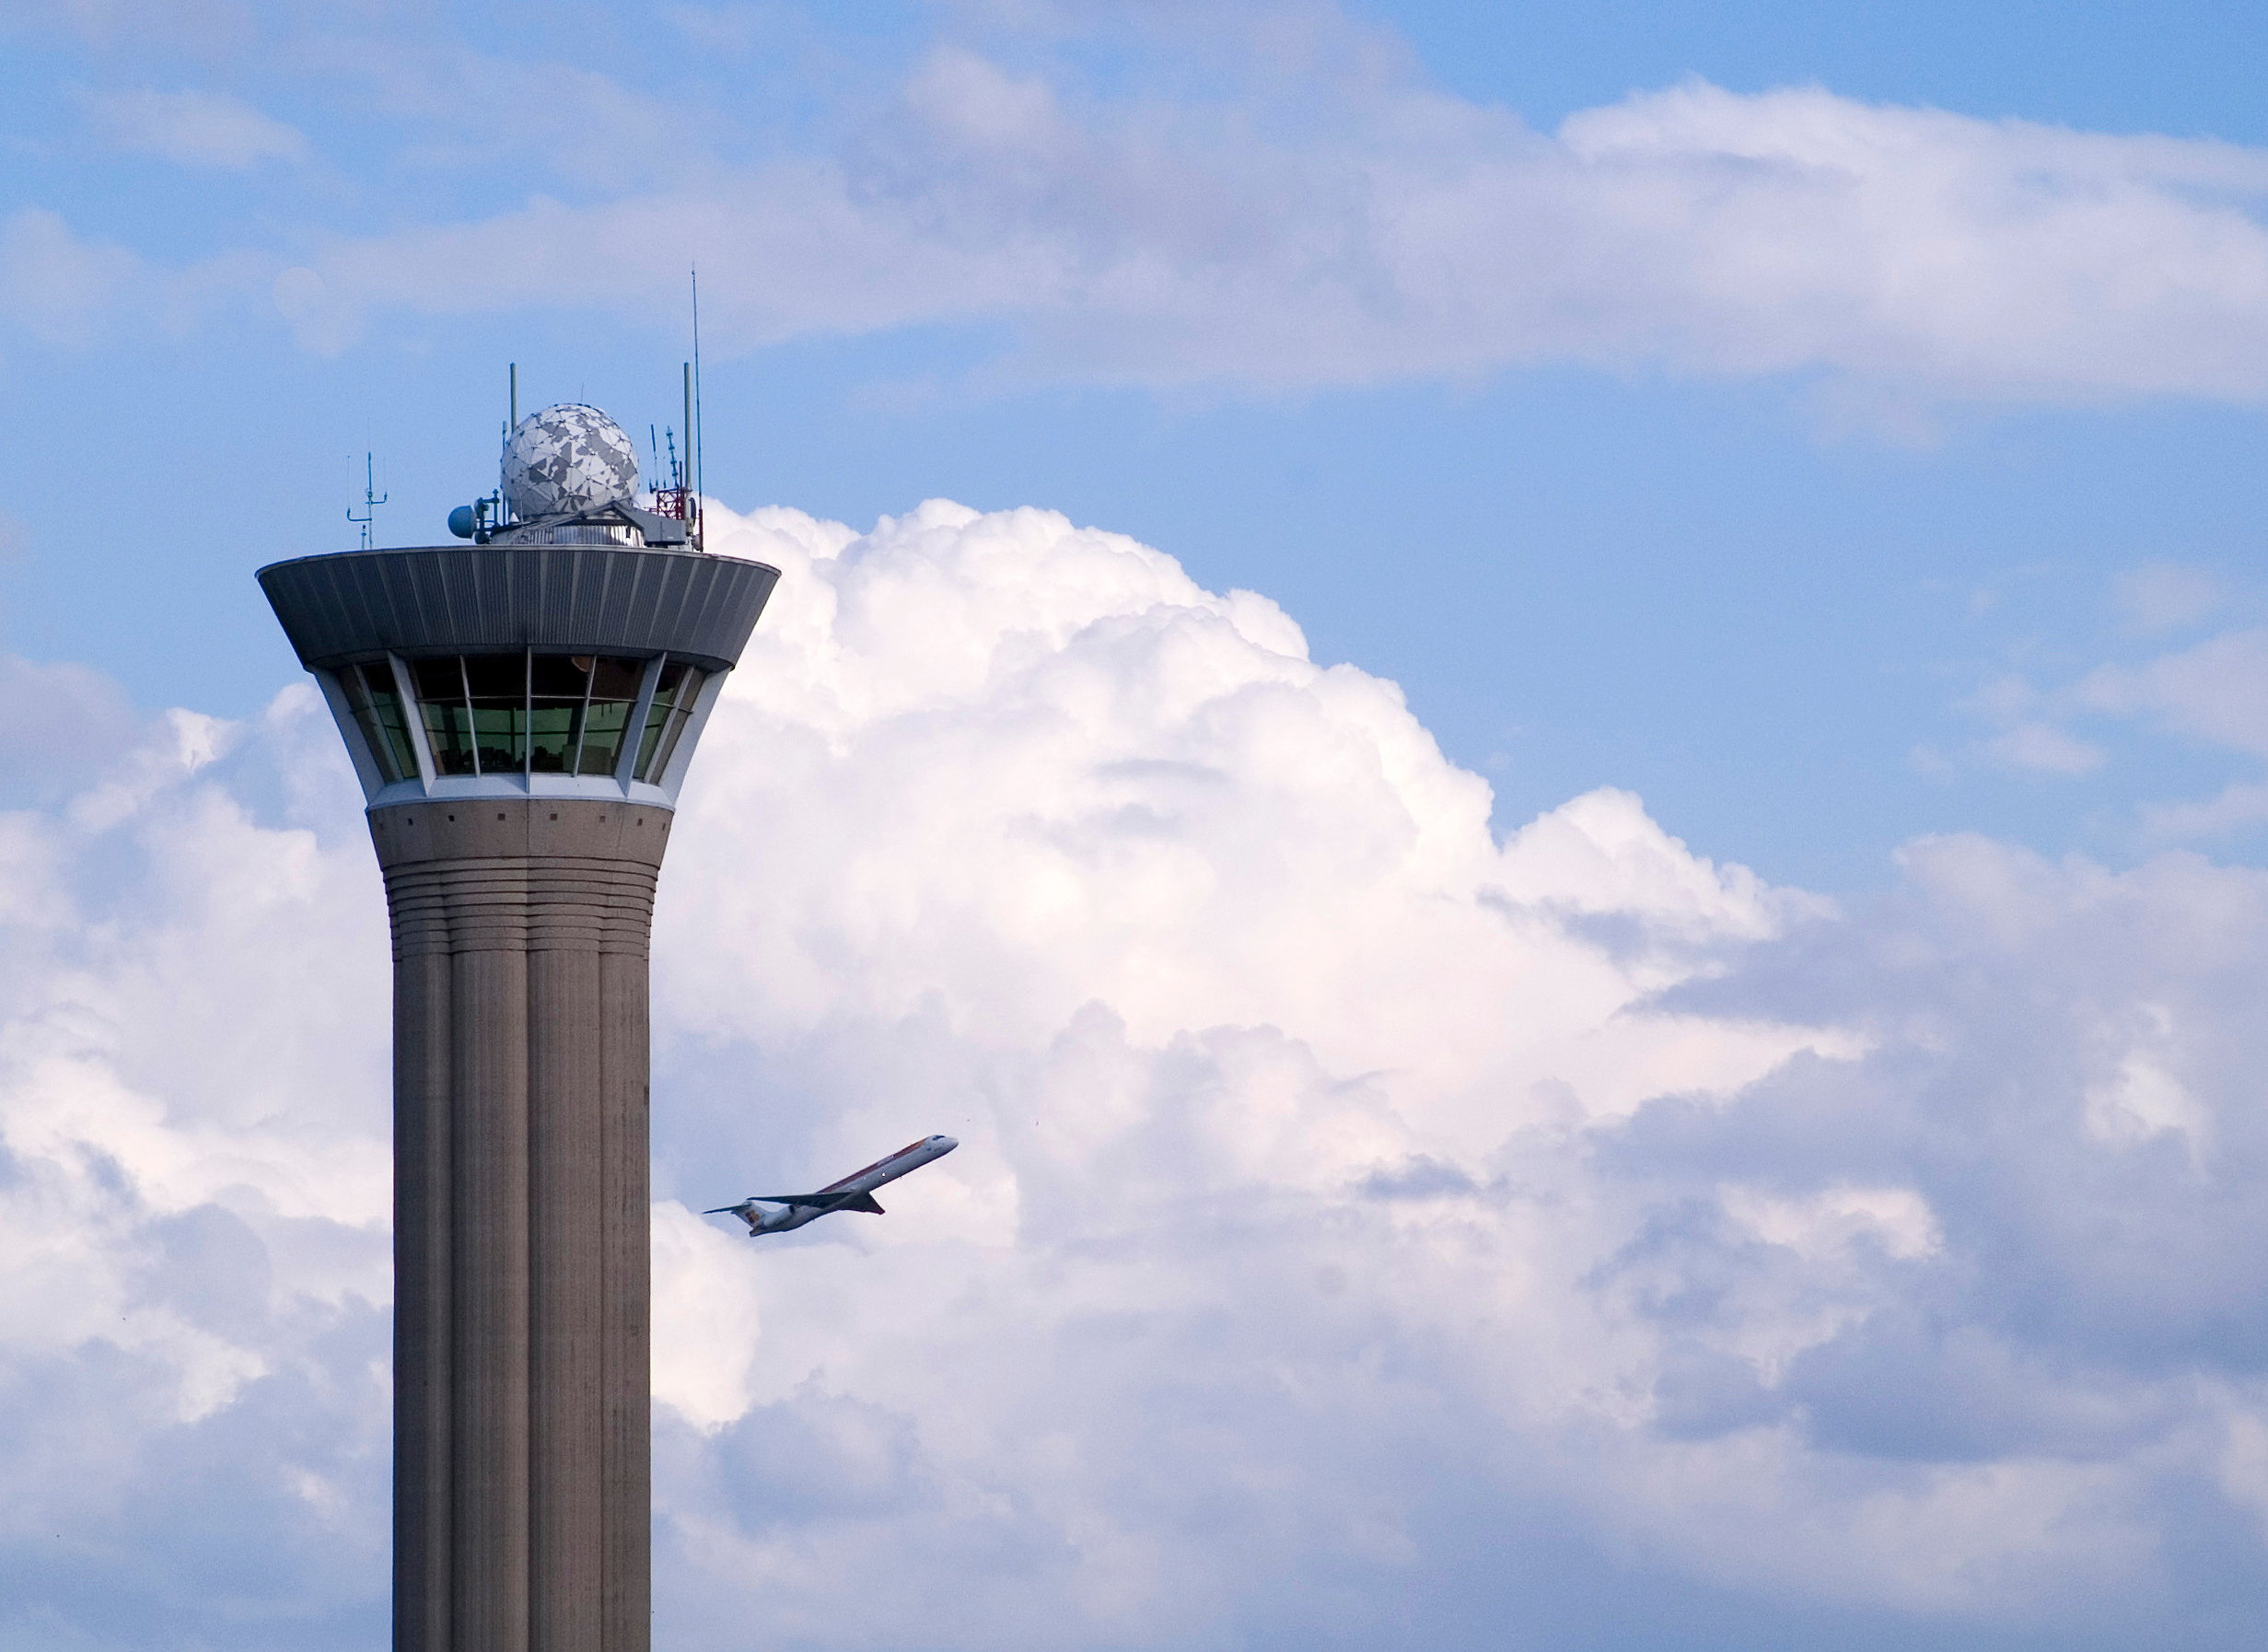 Threat of a new strike by air traffic controllers for the Ascension Bridge on May 9, 10 and 11